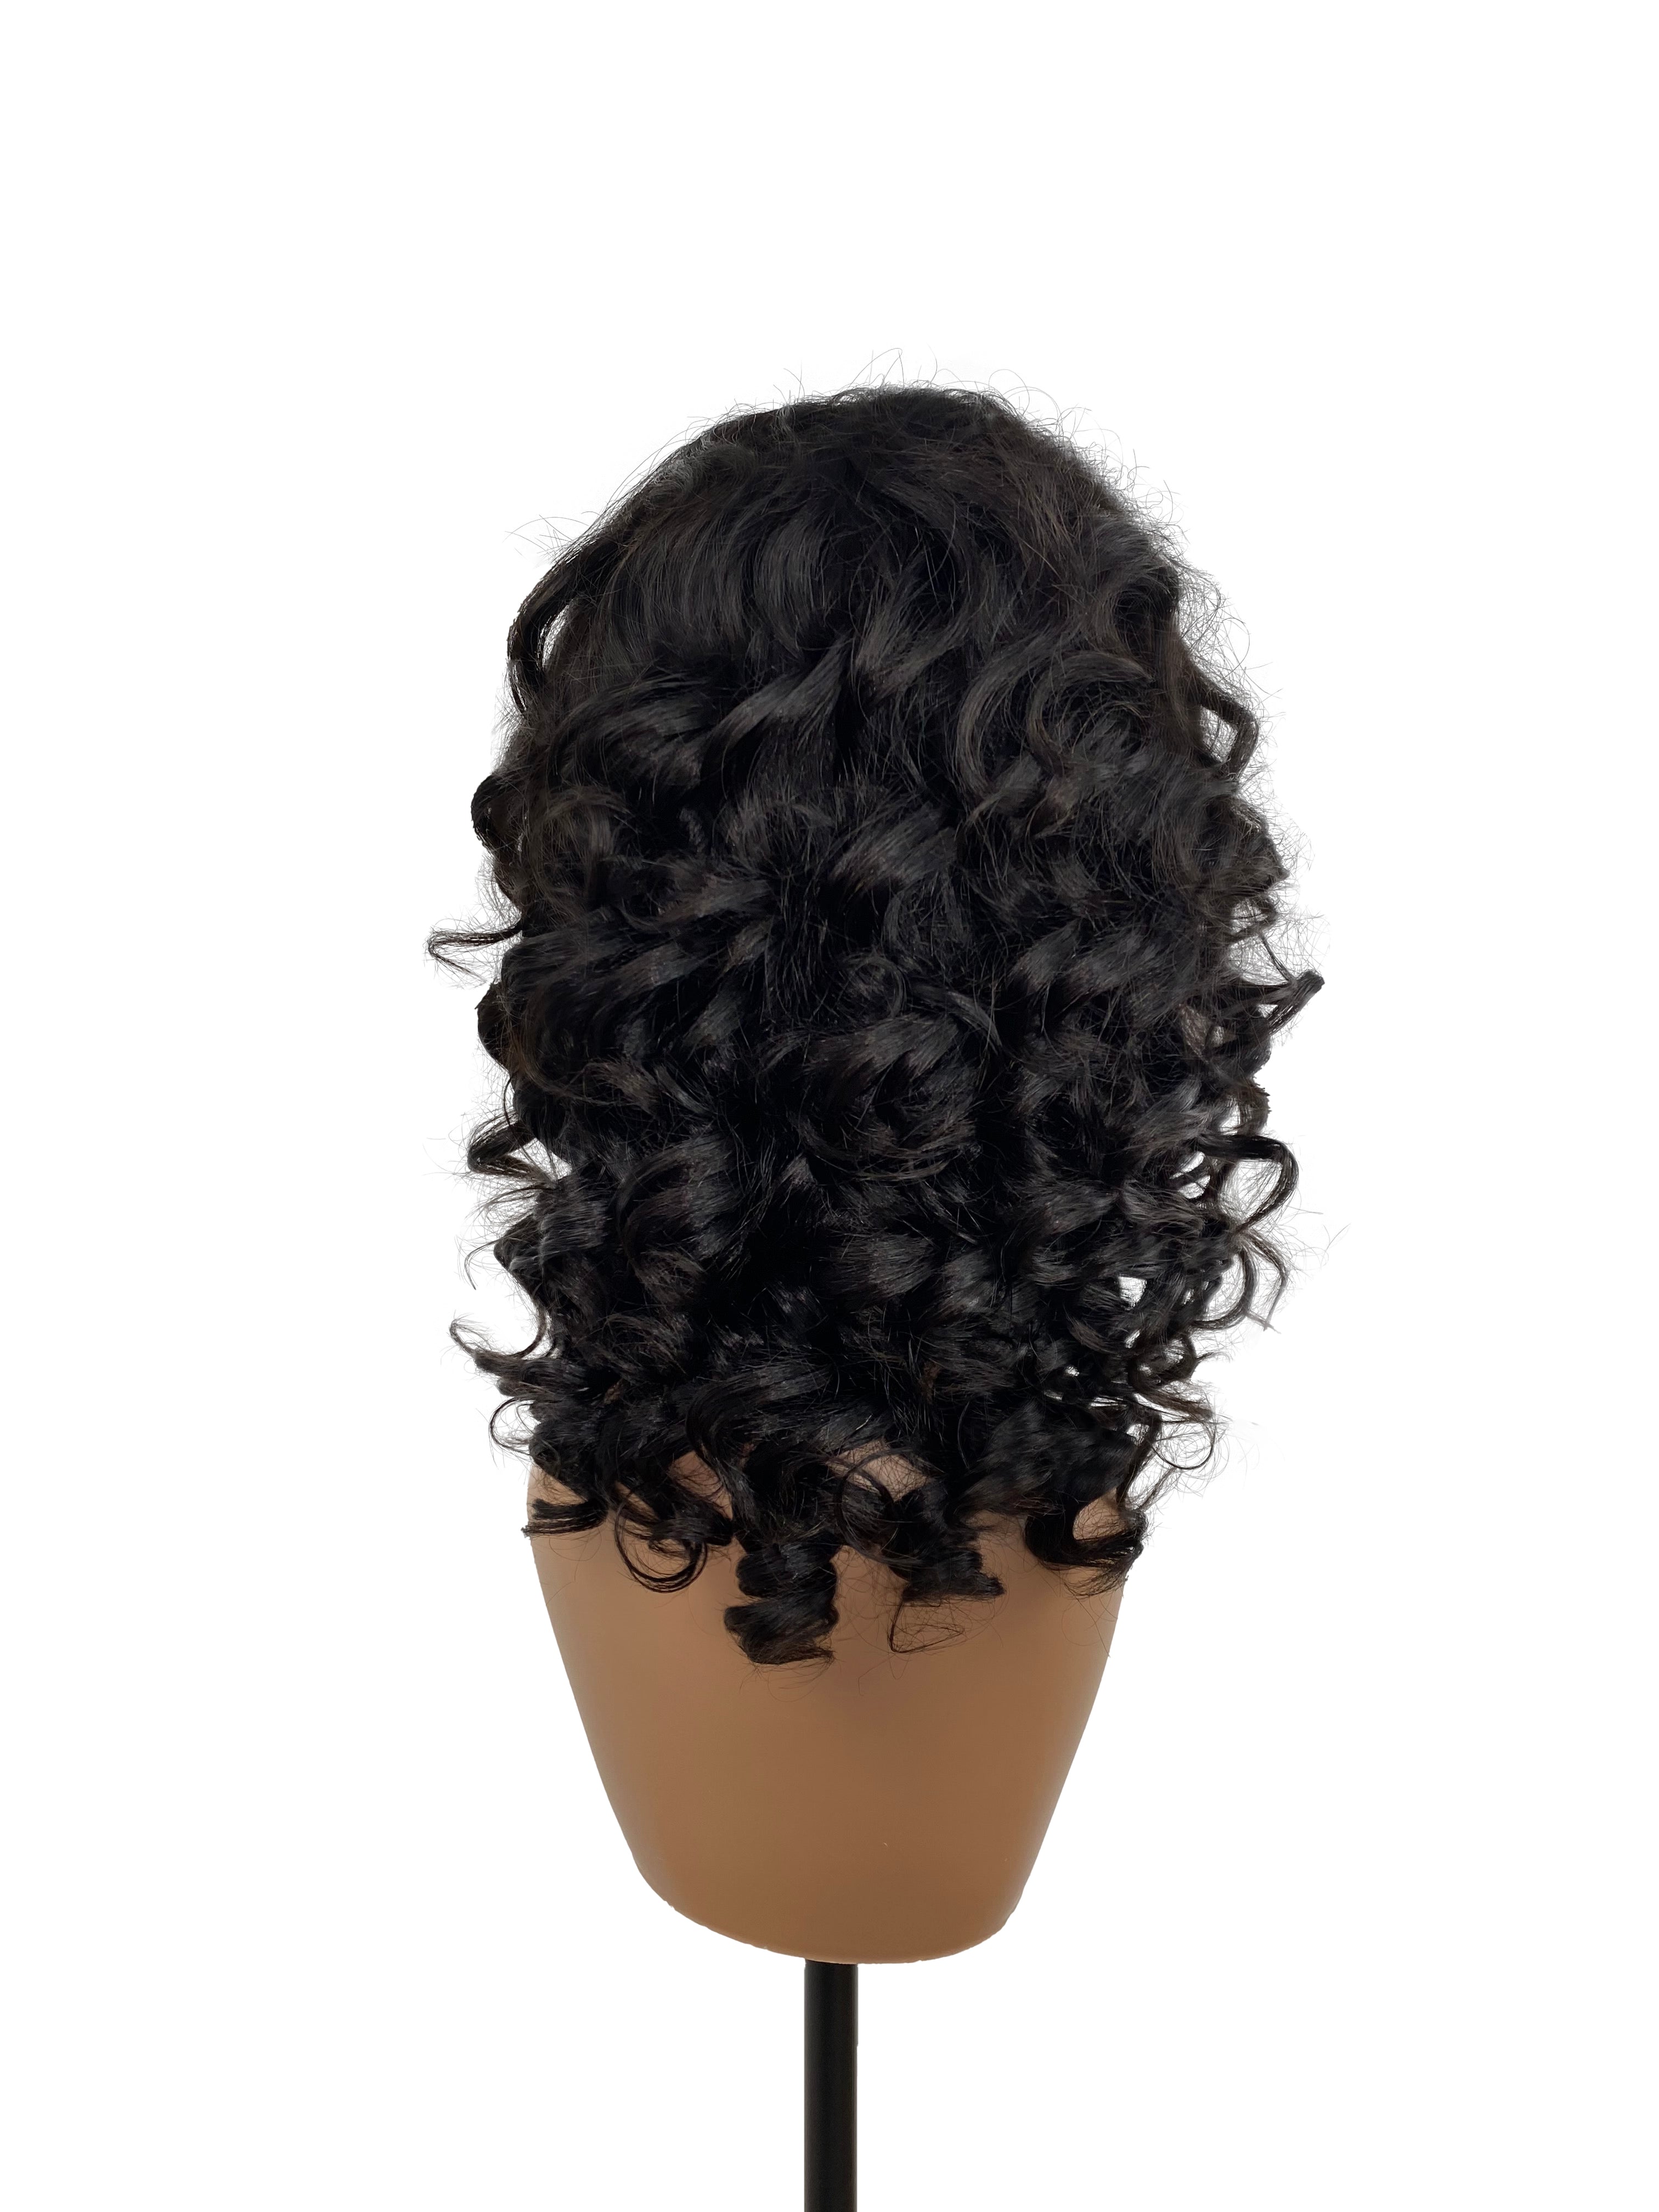 180% Density Fumi Customized13x4 Lace Frontal Wig 220% Denisty 100% Human Hair Natural Color, #4, P4/27, Body Wave, Curl, Loose Curl